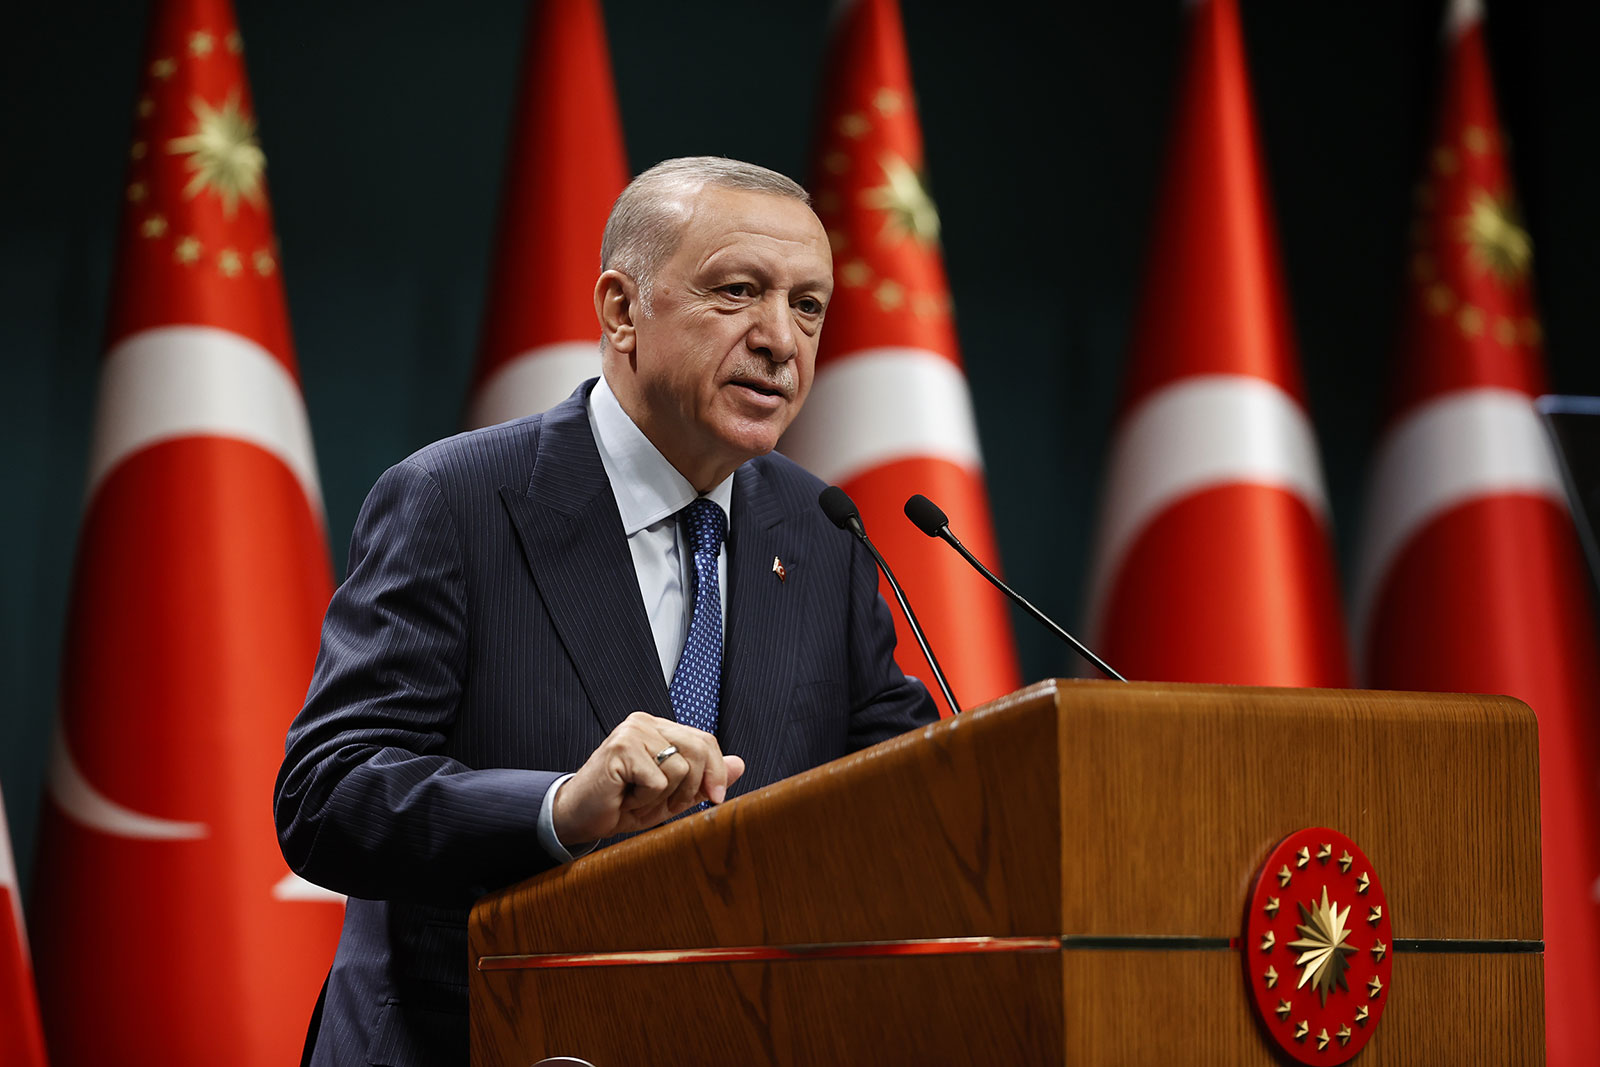 Turkish President Recep Tayyip Erdoğan speaks during a press conference after a cabinet meeting on July 18 in Ankara, Turkey.